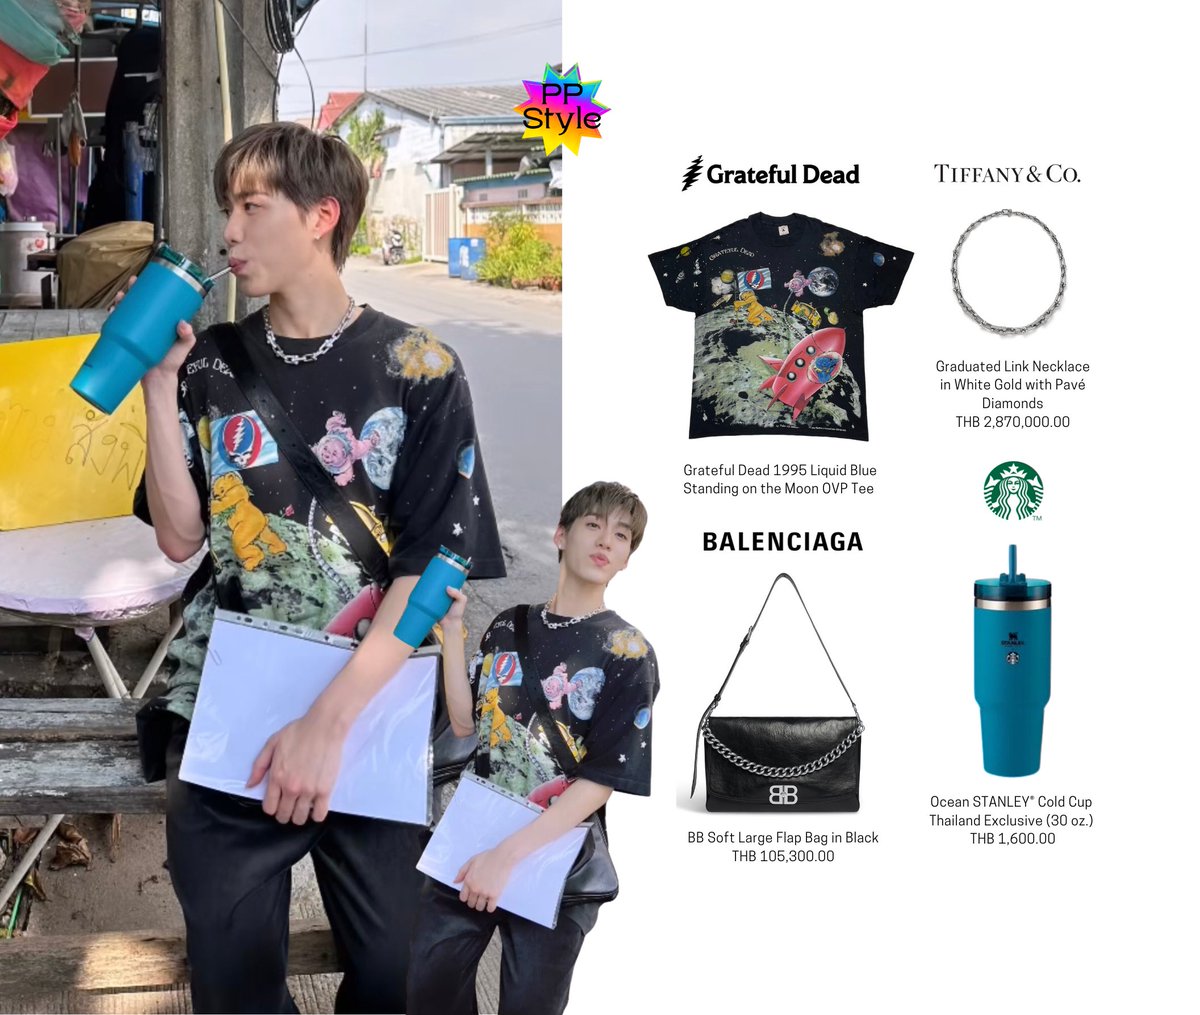 PP KRIT STYLE :

#GreatfulDead Grateful Dead 1995 Liquid Blue Standing on the Moon Tee
#TiffanyAndCo Graduated Link Necklace
in White Gold with Pavé Diamonds
#Balenciaga BB Soft Large Flap Bag in Black
#Starbucks Ocean STANLEY® Cold Cup 

#ppkritt #ppkritstyle